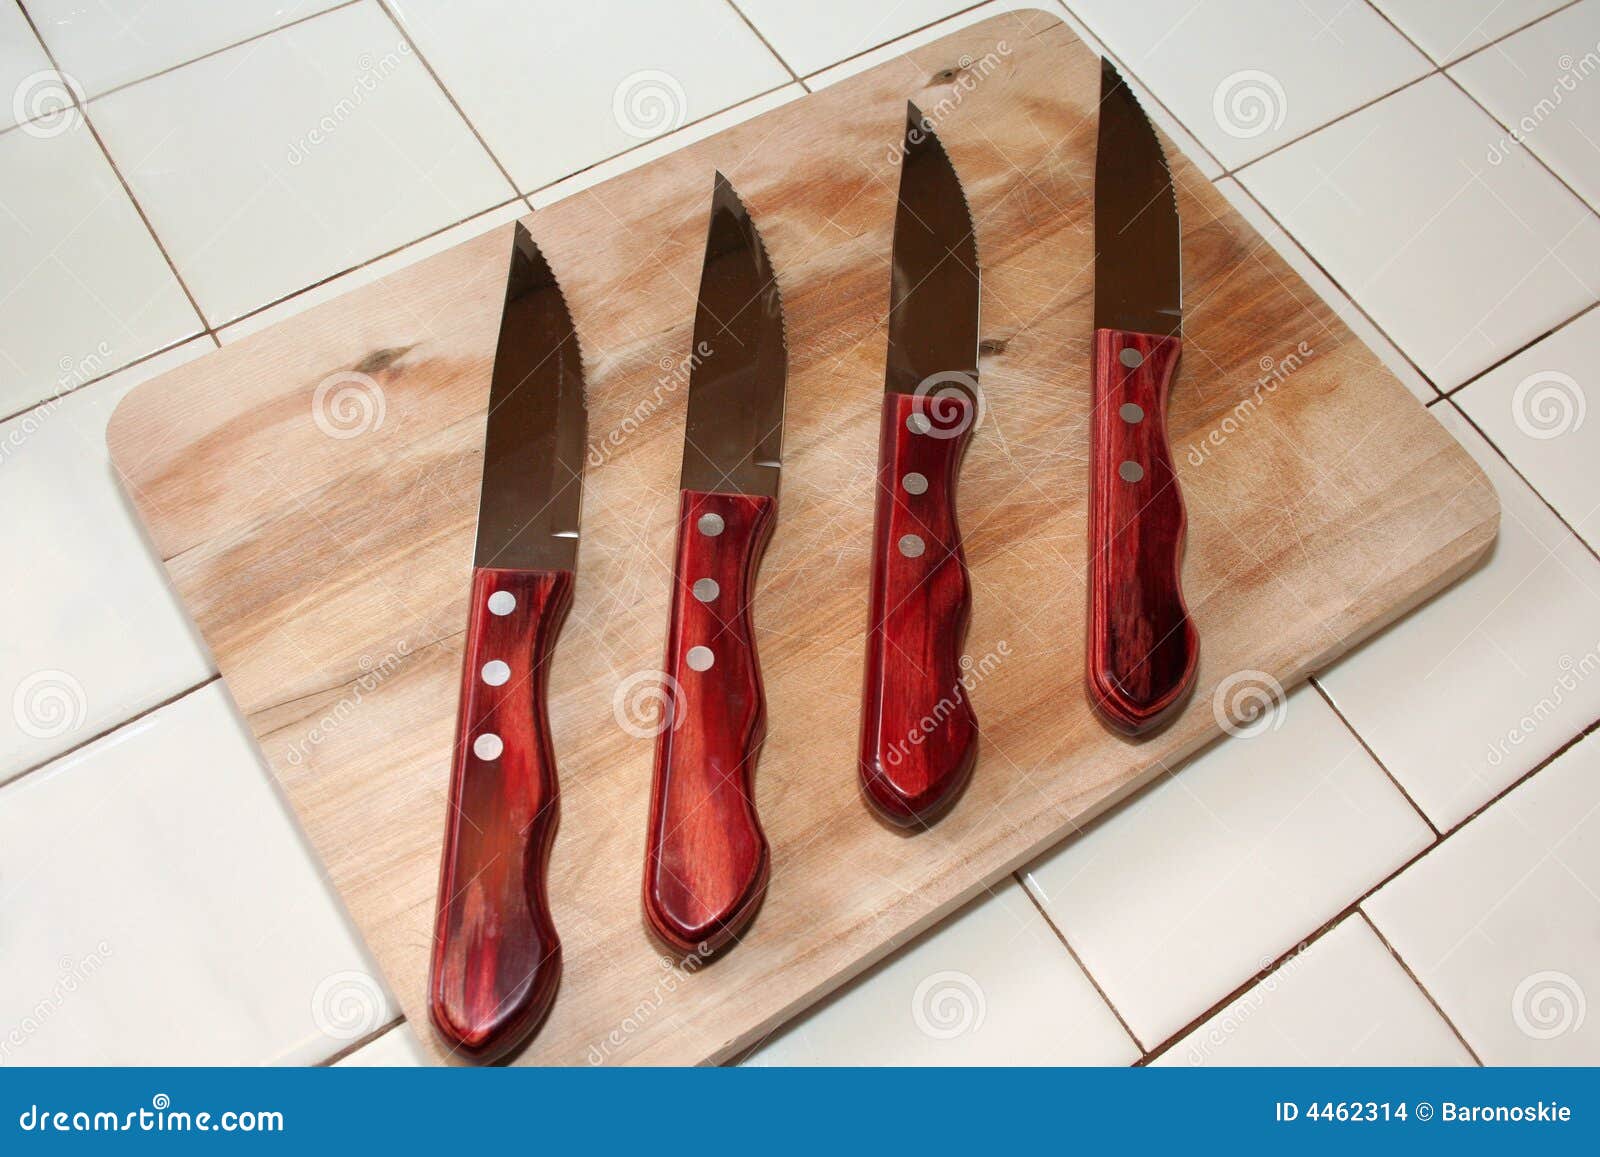 four knives